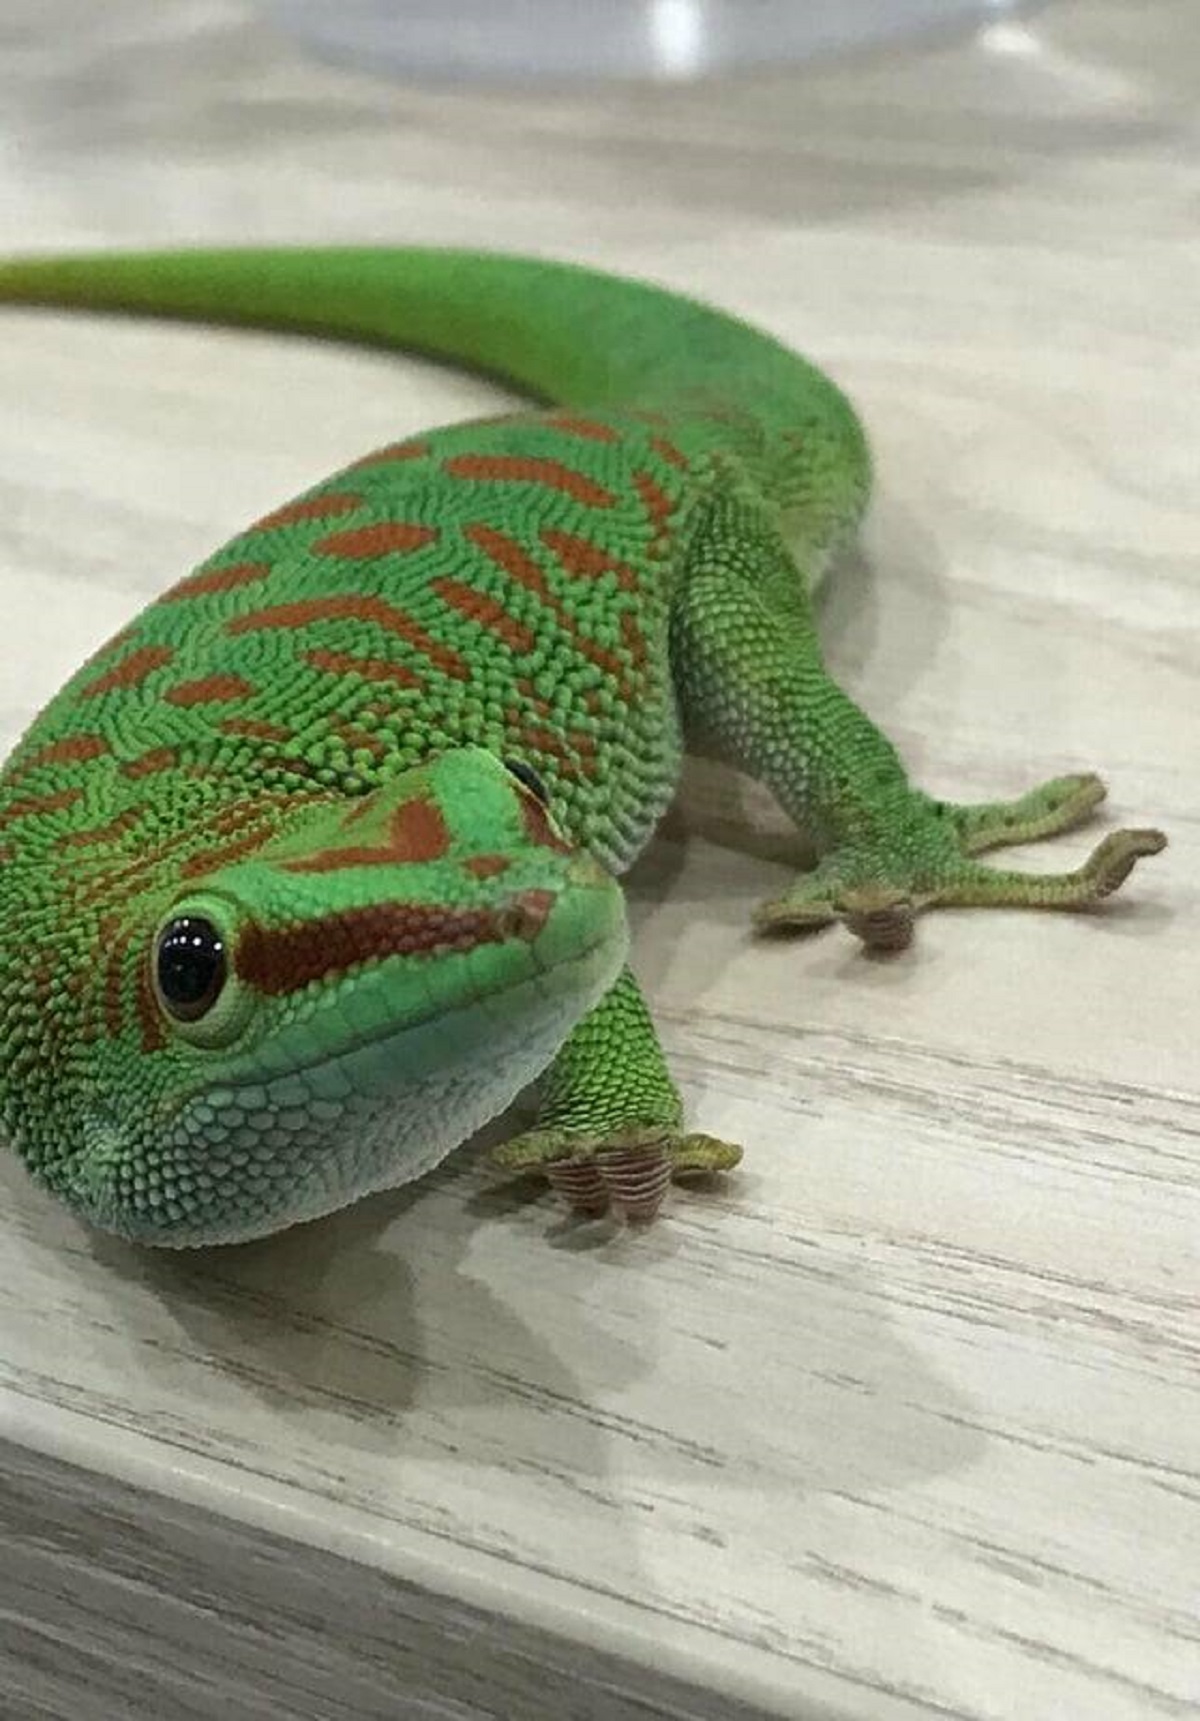 "Geckos curl their toe pads when not in use"